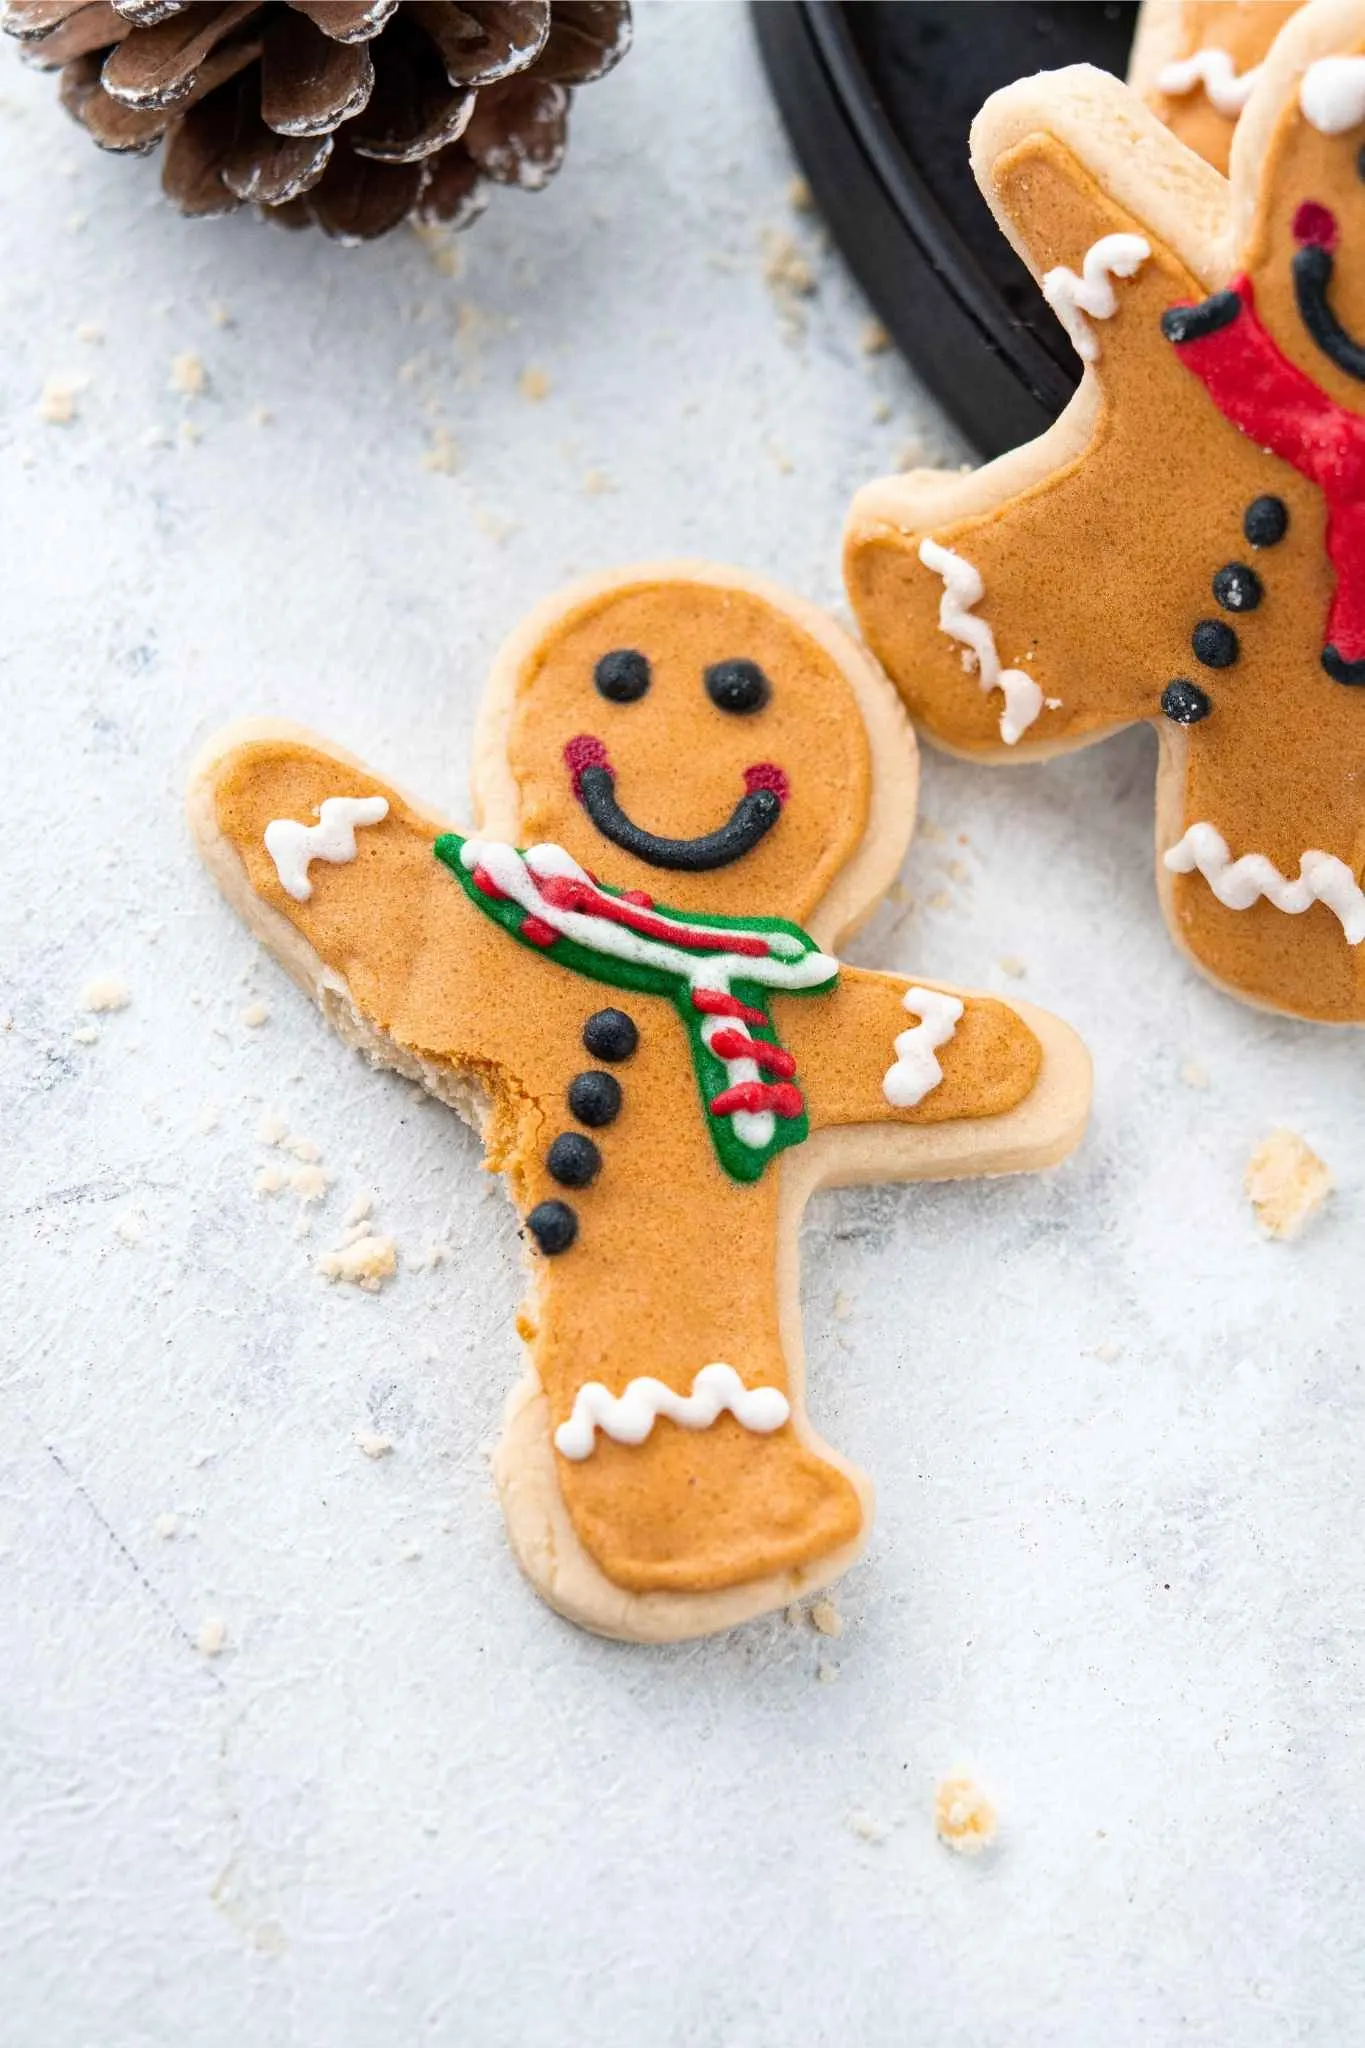 A gingerbread man Christmas sugar cookie with the leg bitten off.